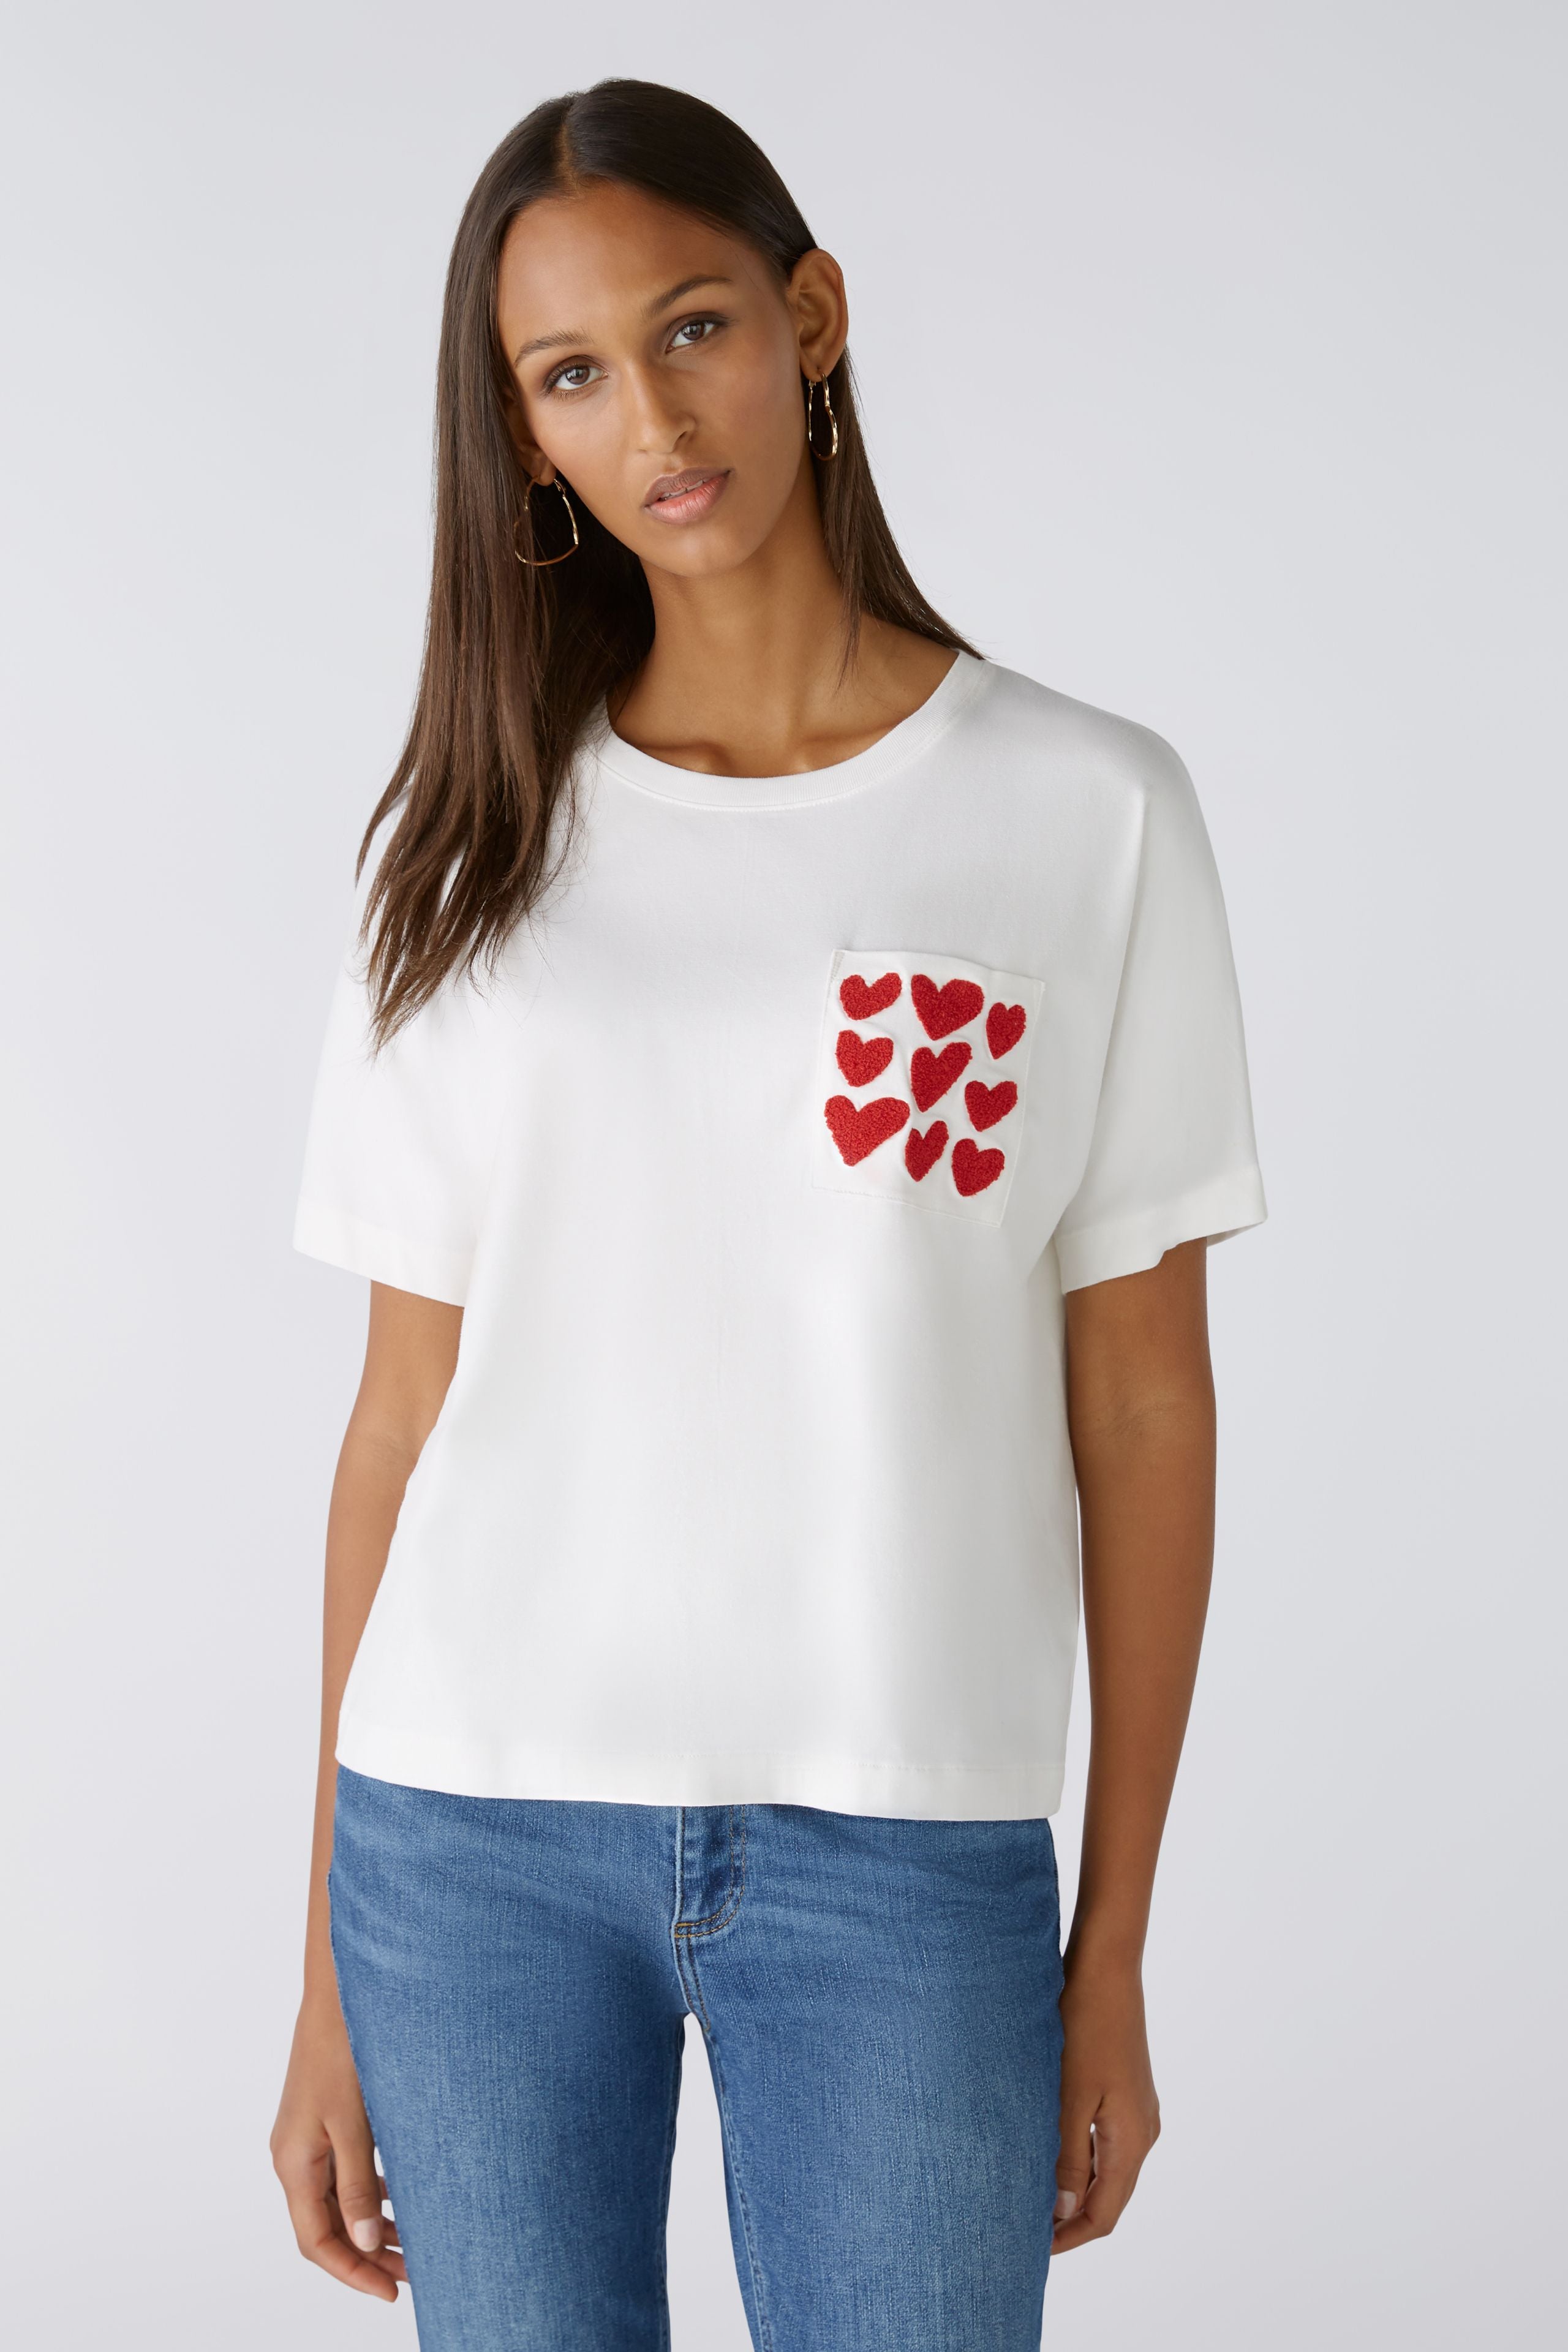 White Tee with Heart Pocket in Cloud Dancer